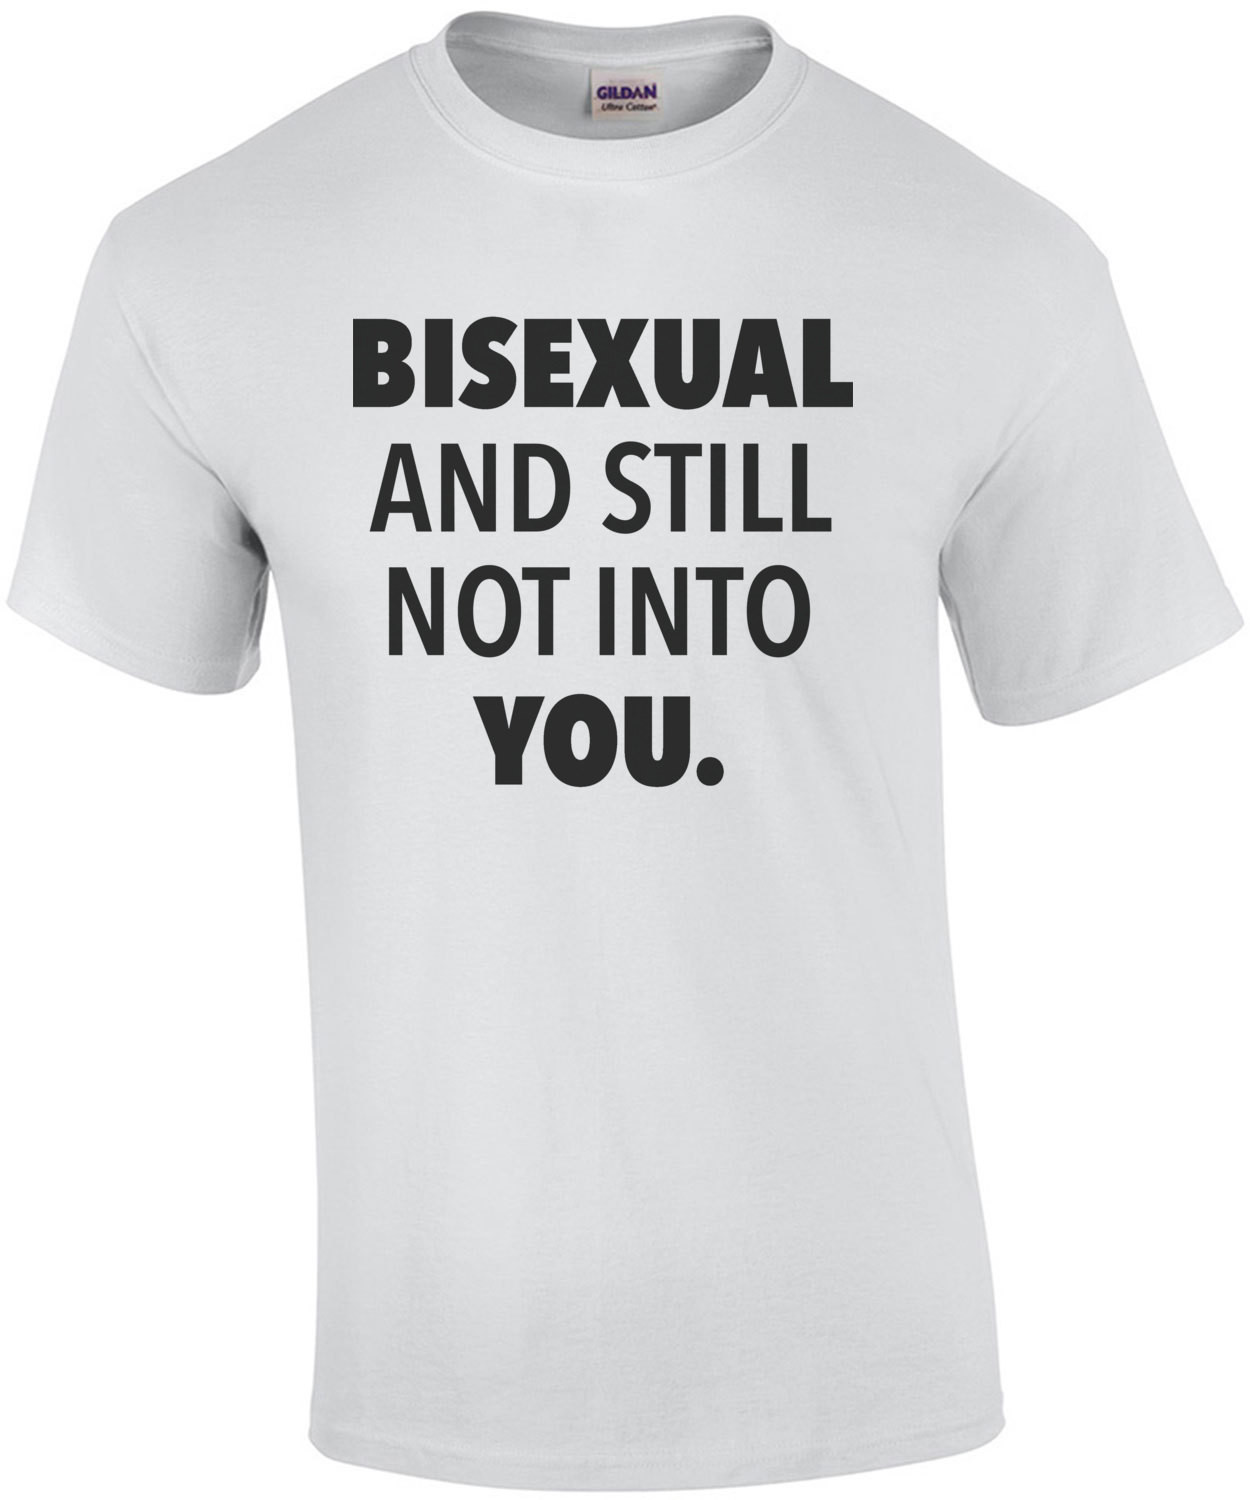 Bisexual and still not into you. Gay Pride T-Shirt